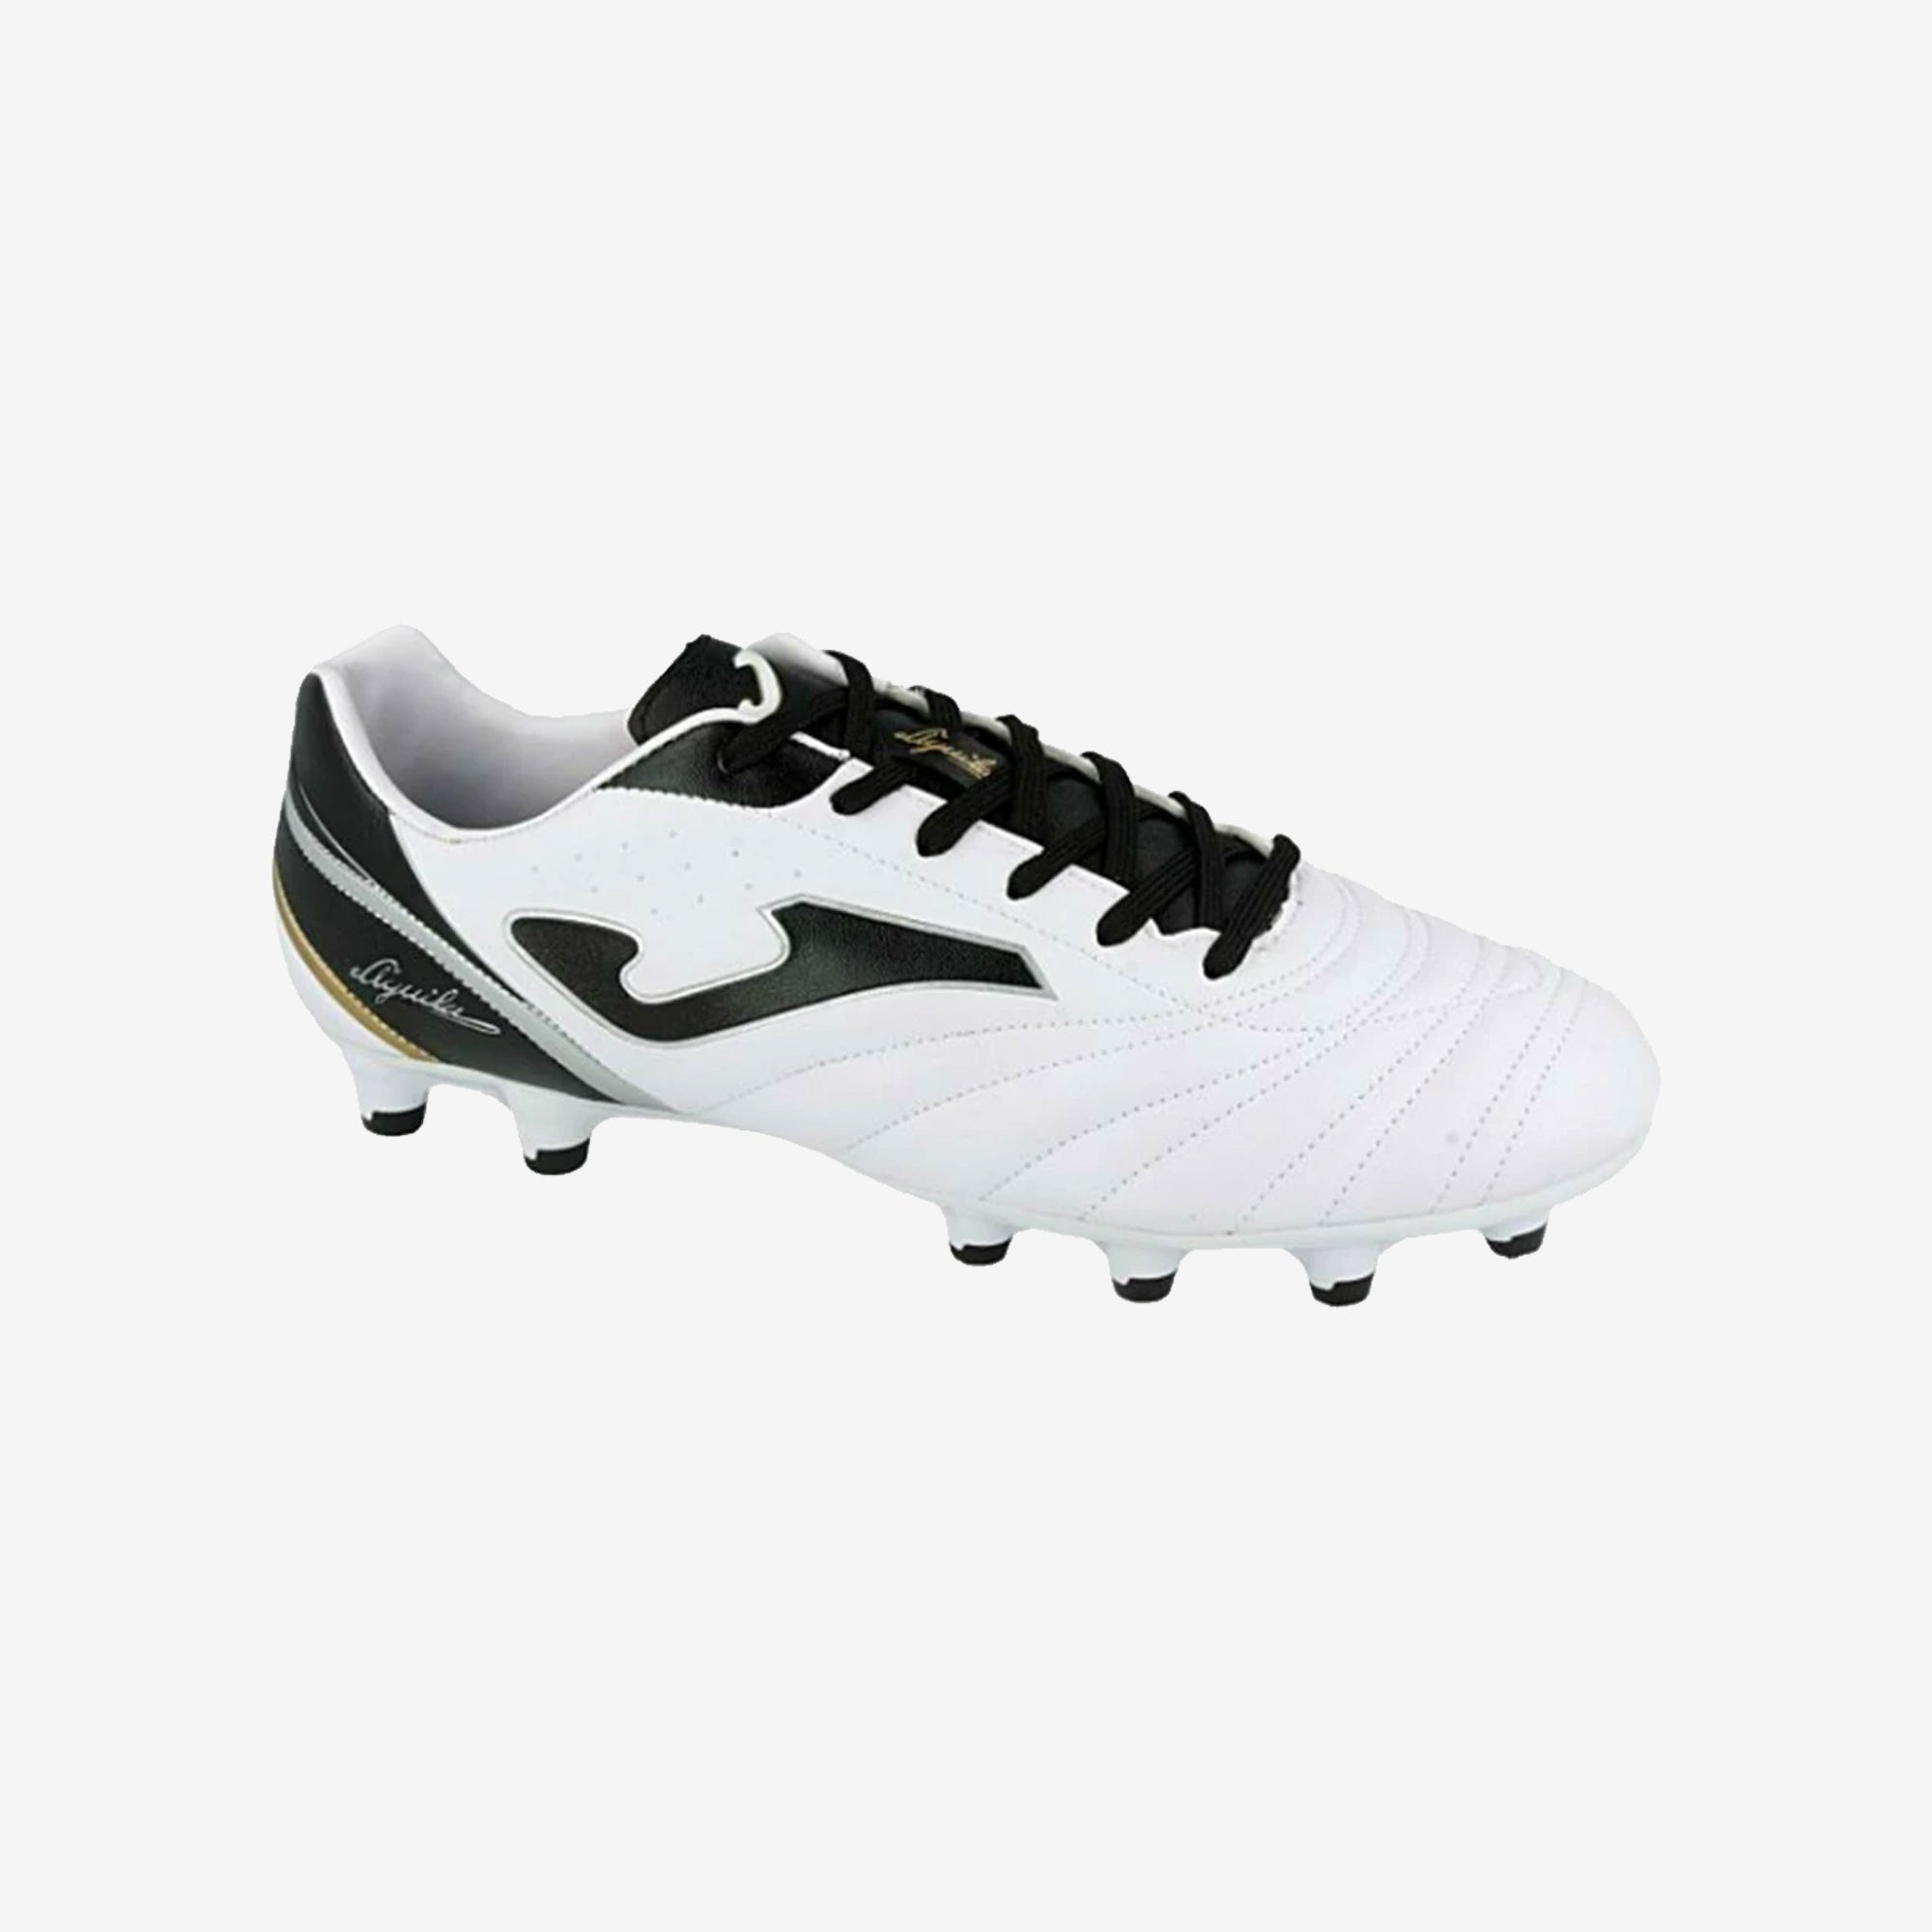 Aguila 602 Firmground Soccer Shoes